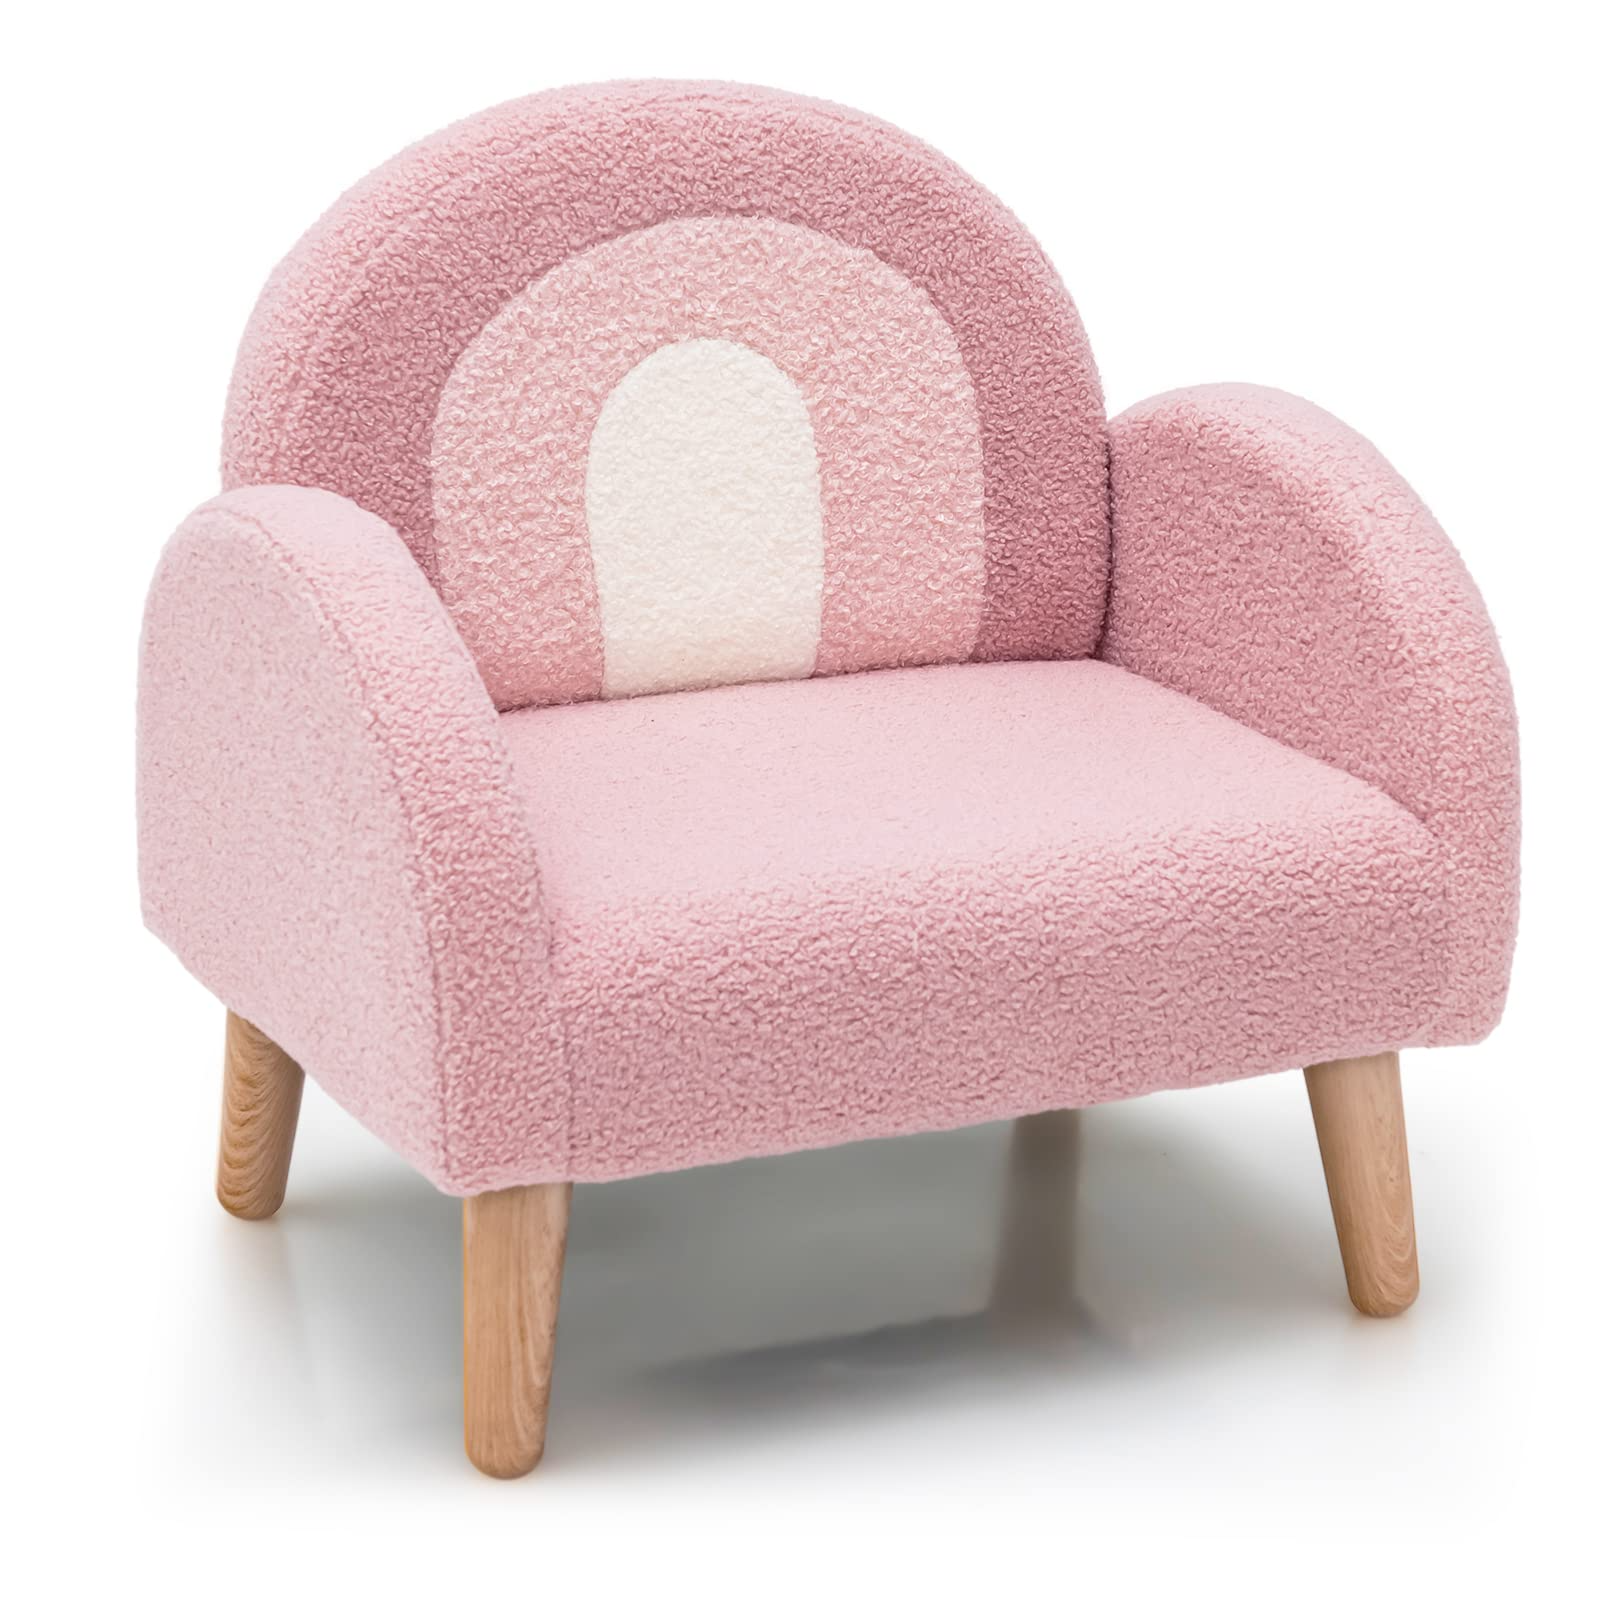 OLAKIDS Kids Sofa, Toddler Armchair with Solid Wooden Frame Anti-Tipping Design Plush Fabric OLAKIDS